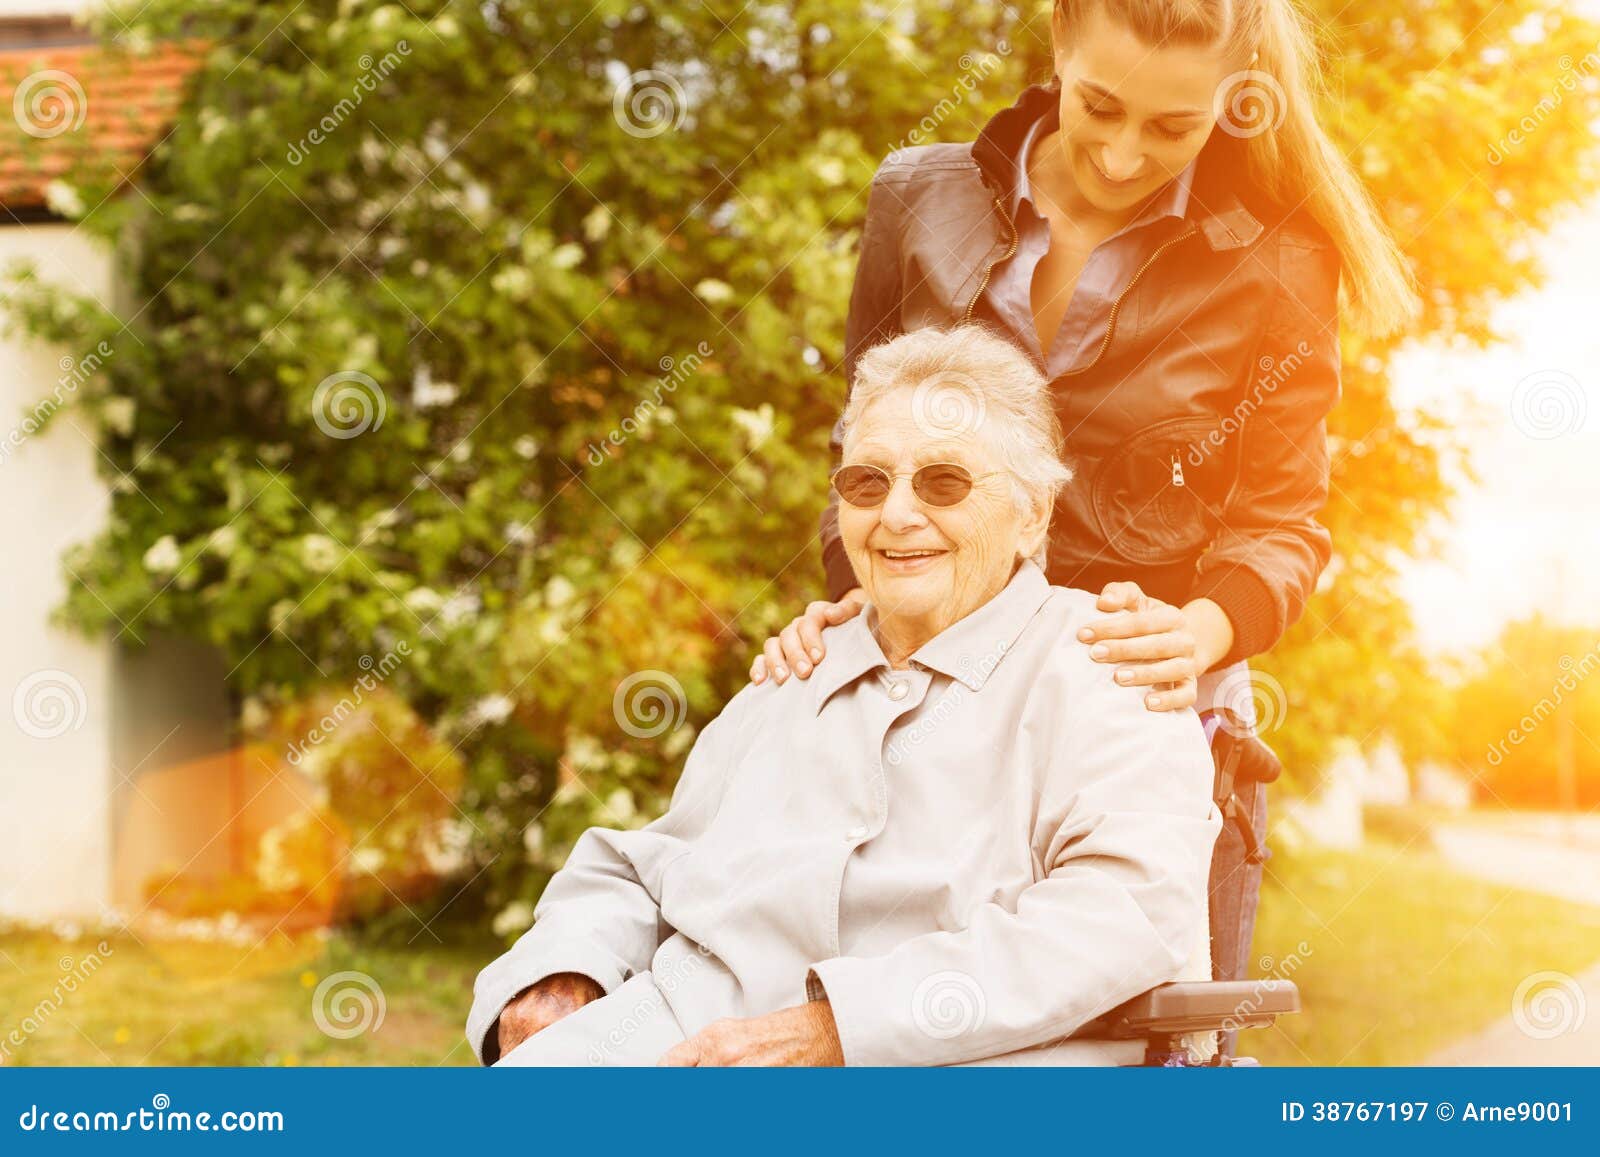 young woman visiting grandmother in nursing home